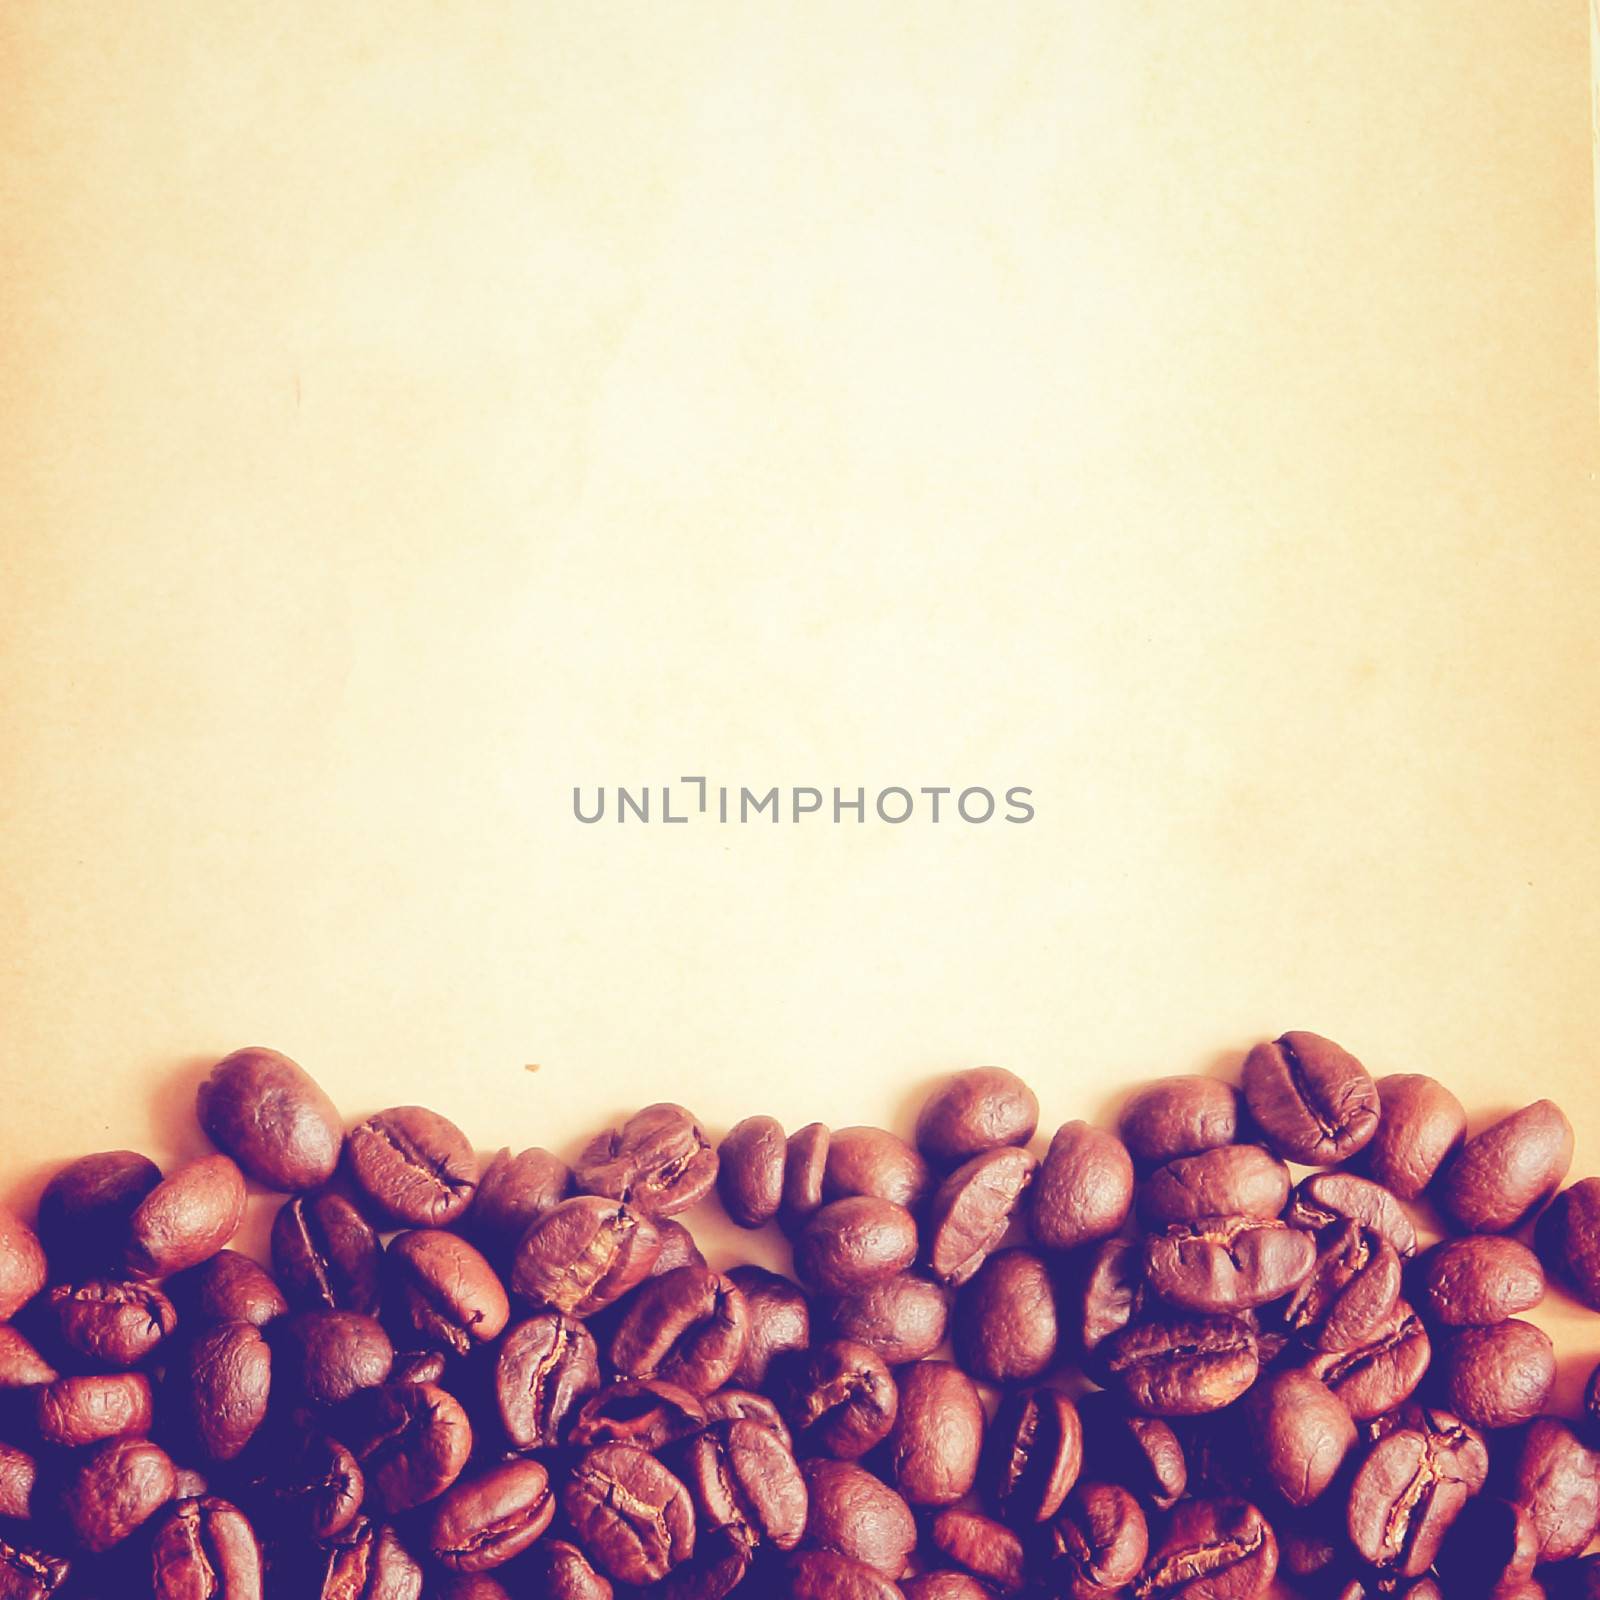 Coffee beans on old paper background with retro filter effect by nuchylee